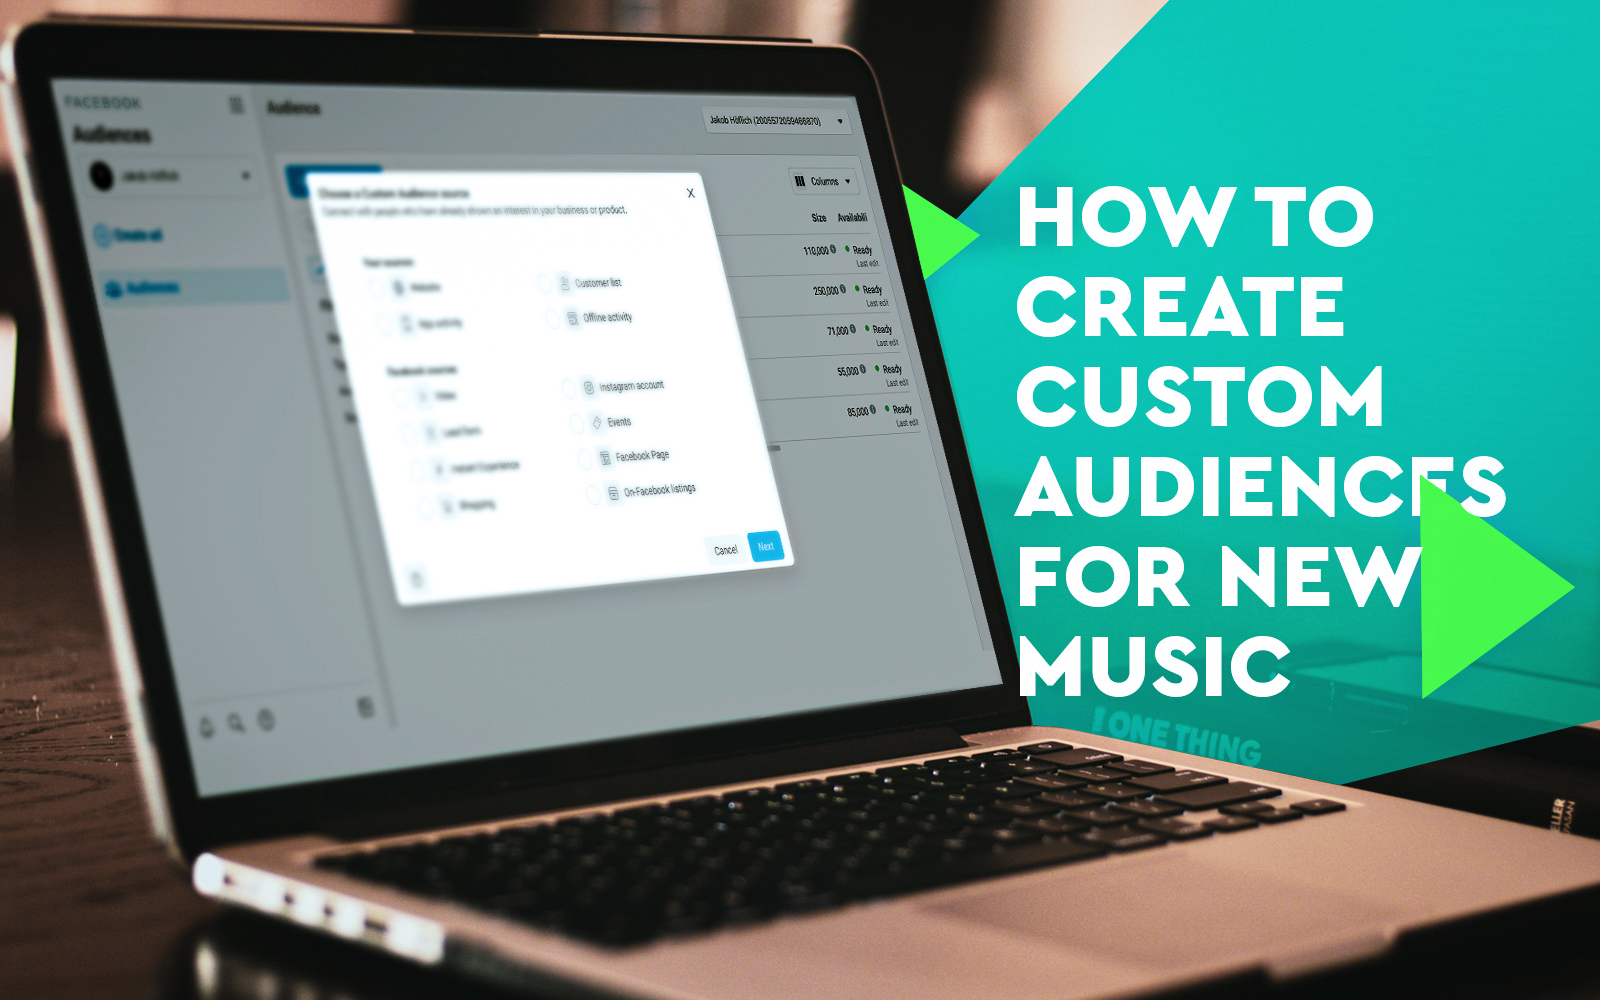 How to Create Custom Audiences for Music